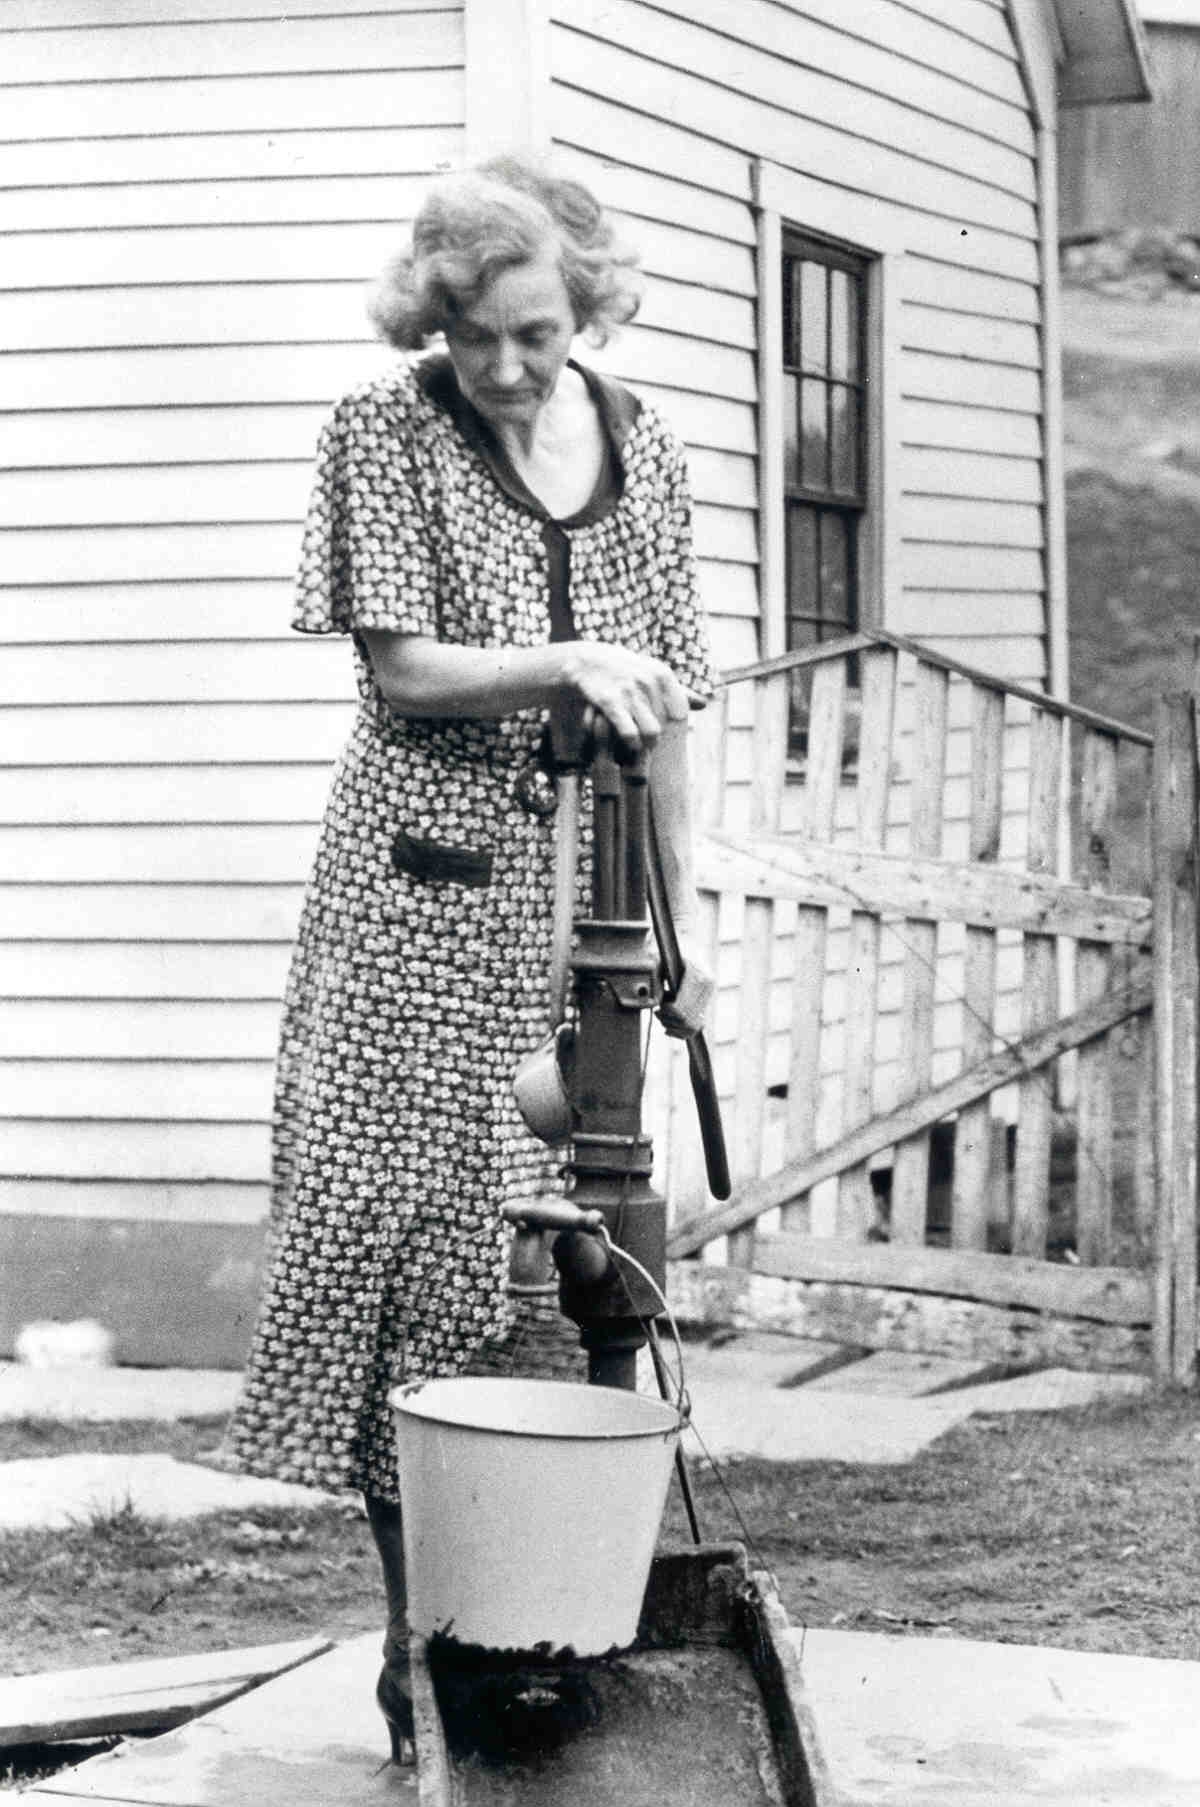 Woman at the water pump. Photo Source: "The Next Greatest Thing" published by NRECA